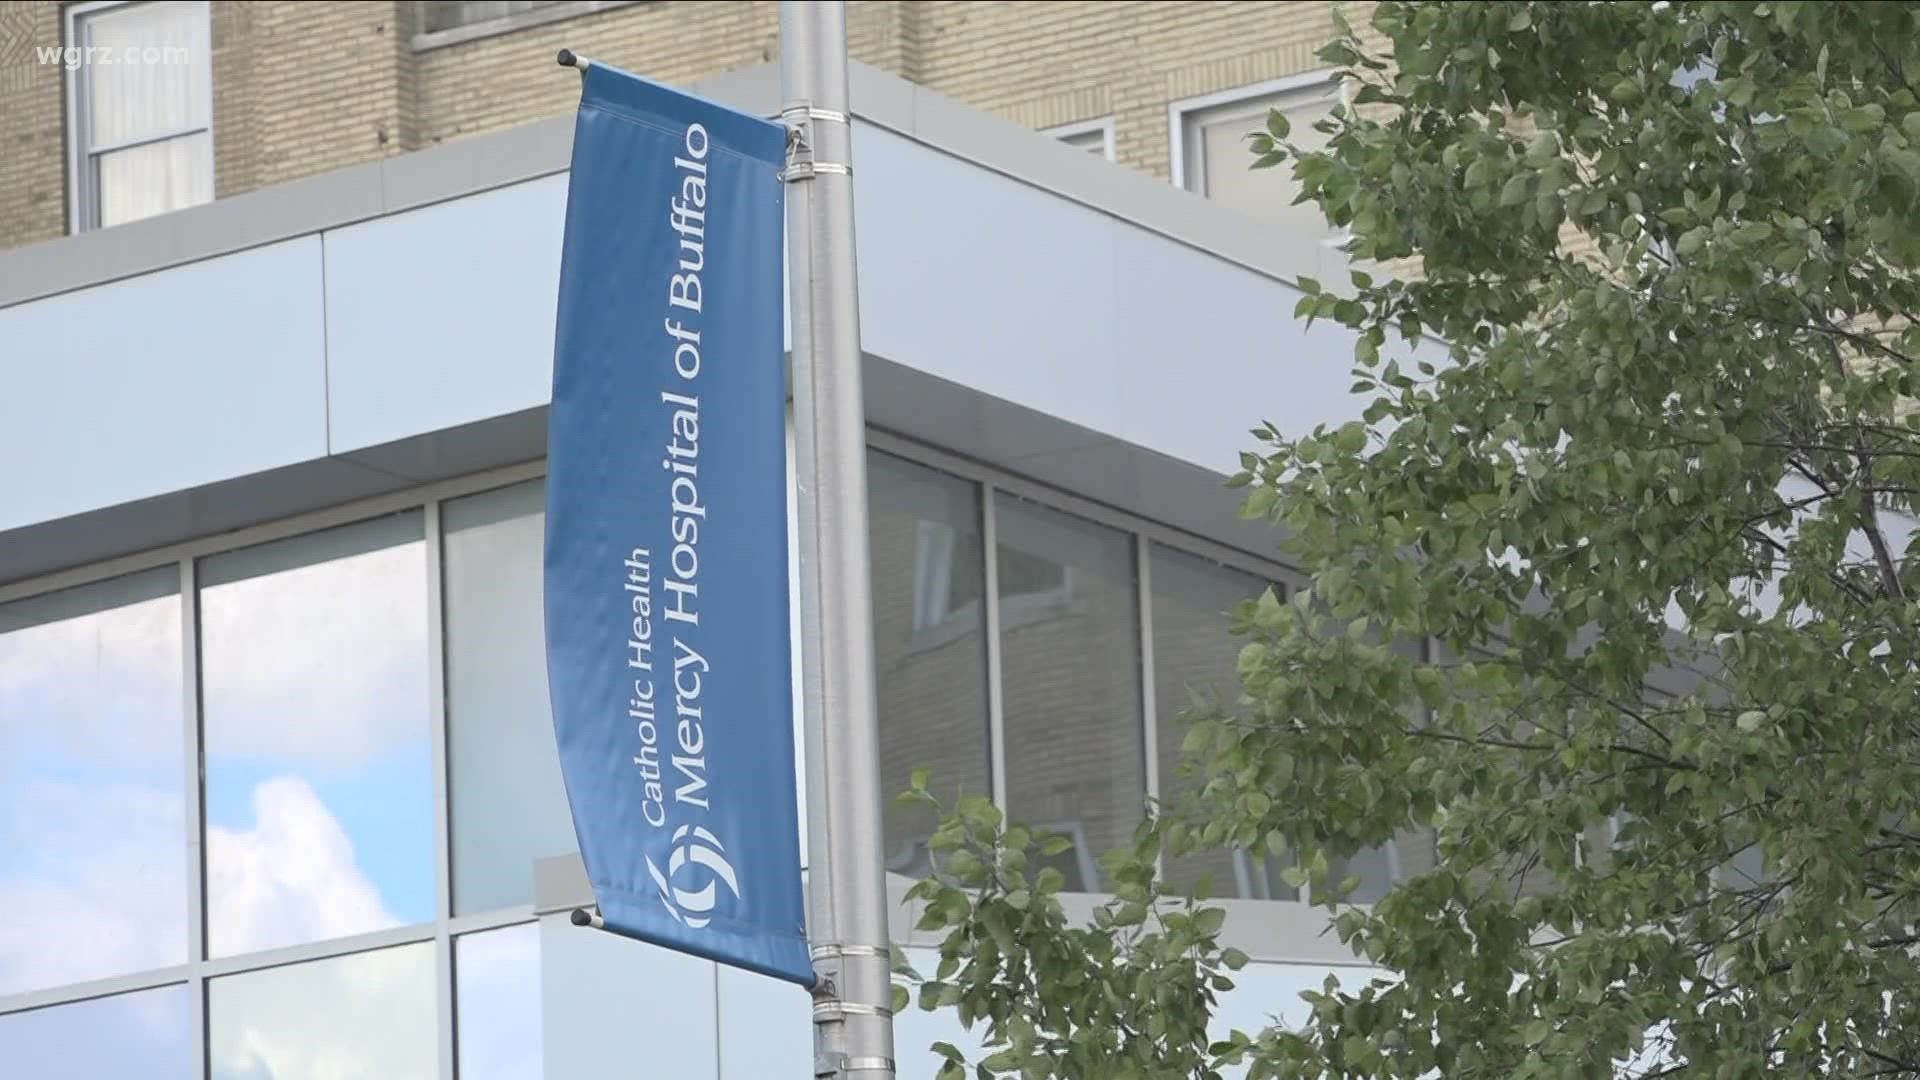 Mercy hospital is working to hire traveling nurses and other temporary staff as the CWA strike deadline looms.